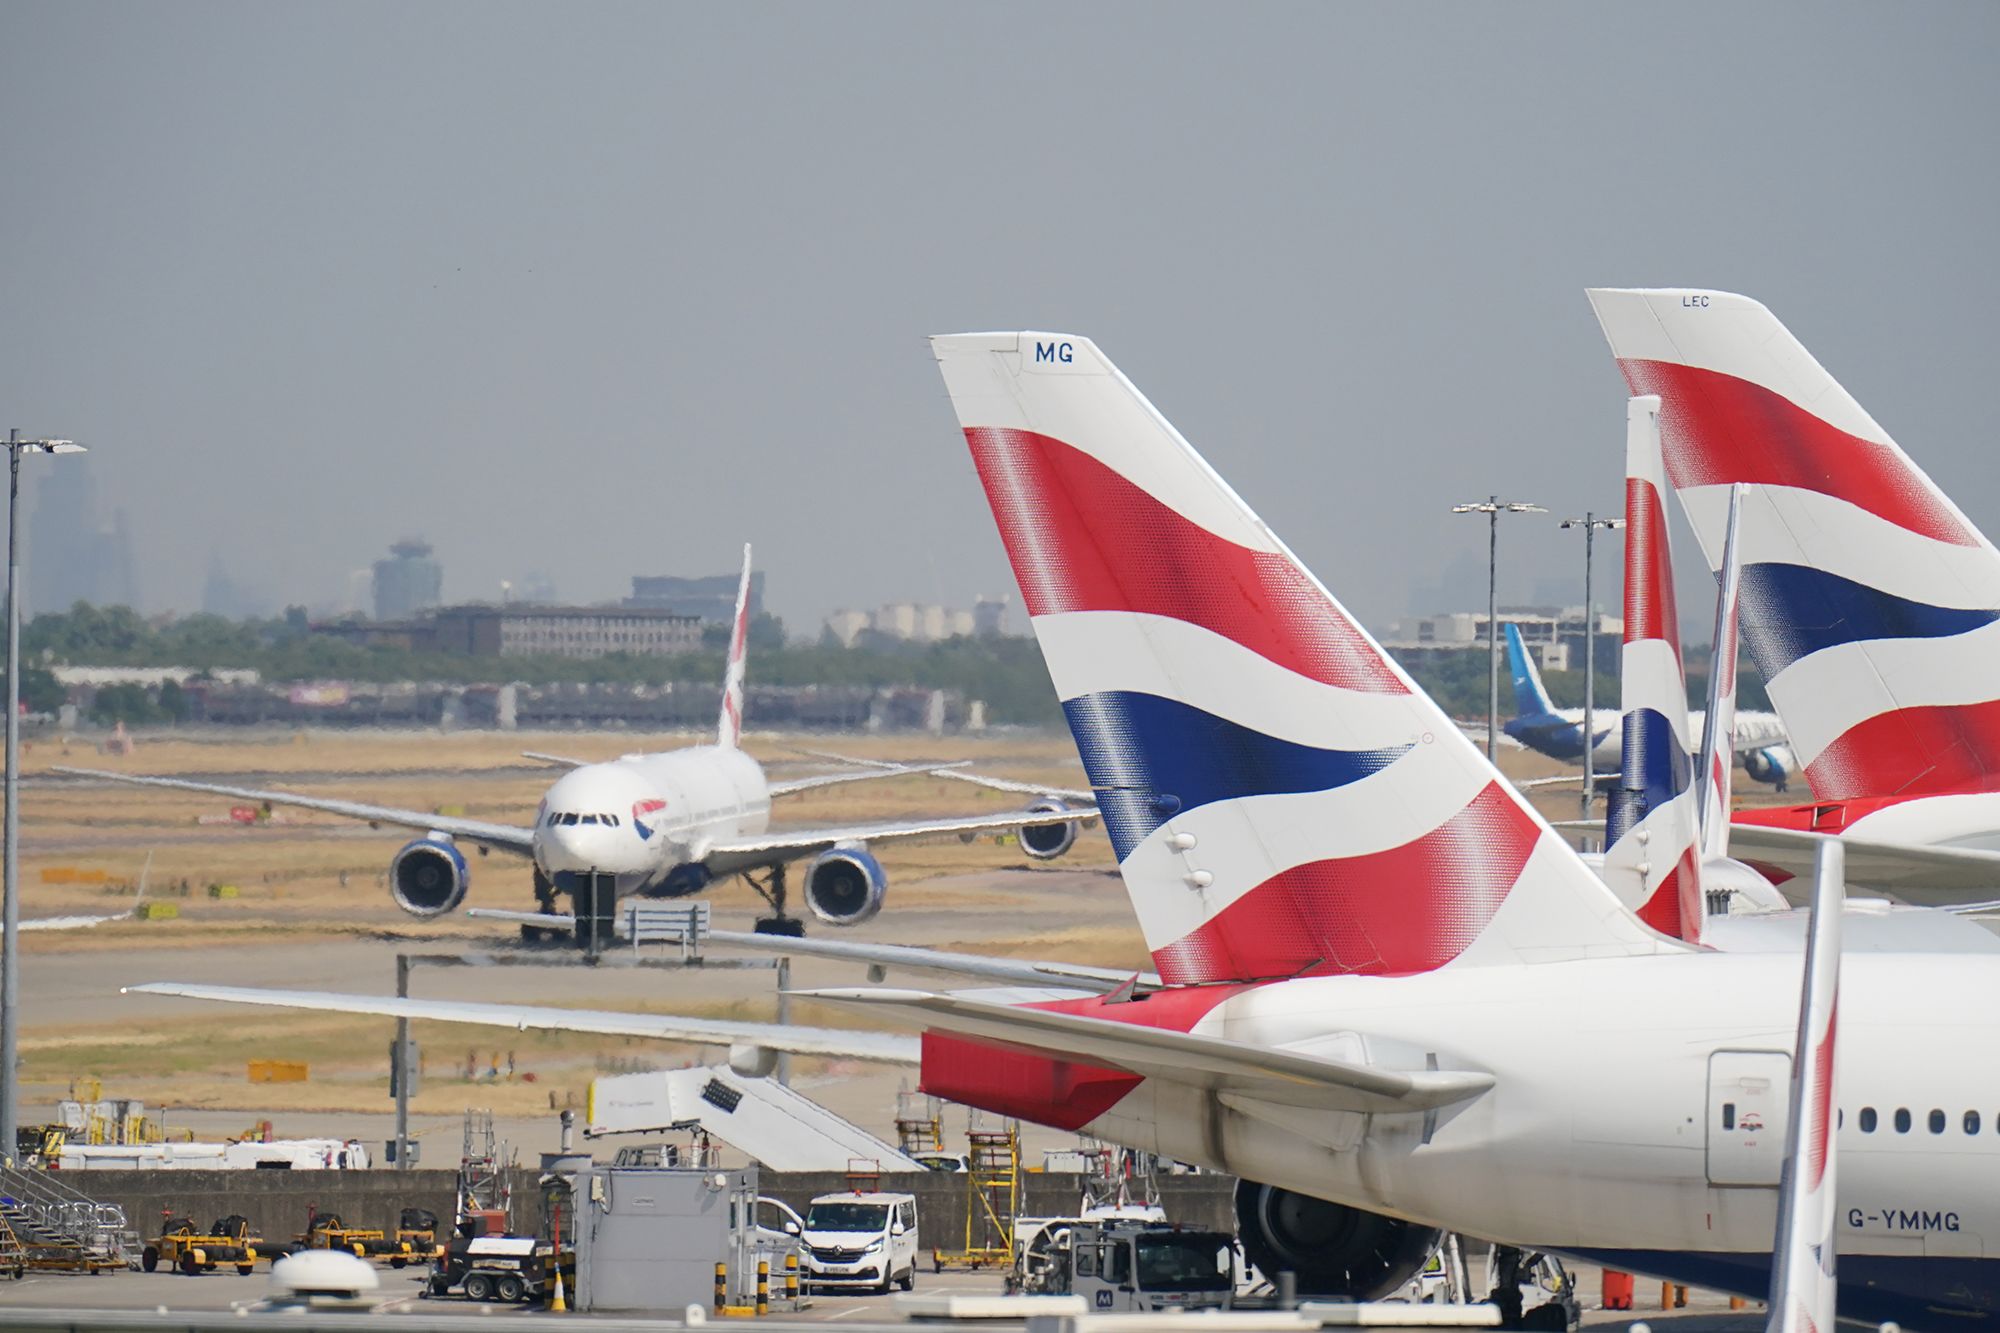 London Heathrow Airport certified as a 3-Star COVID-19 Airport